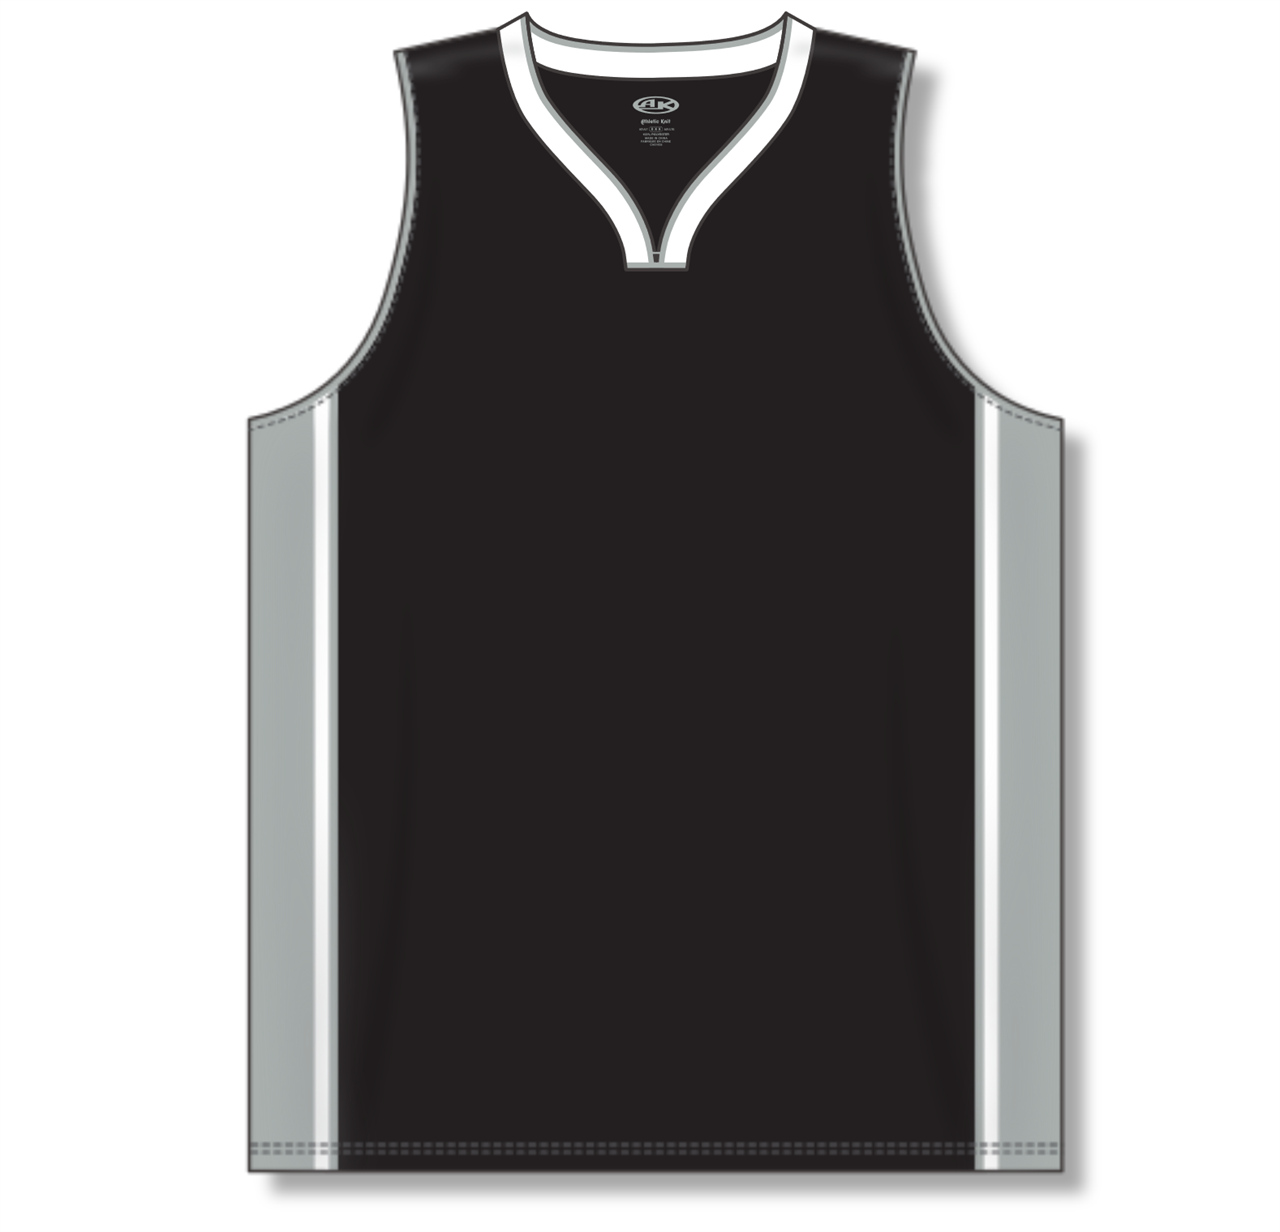 all white basketball jersey